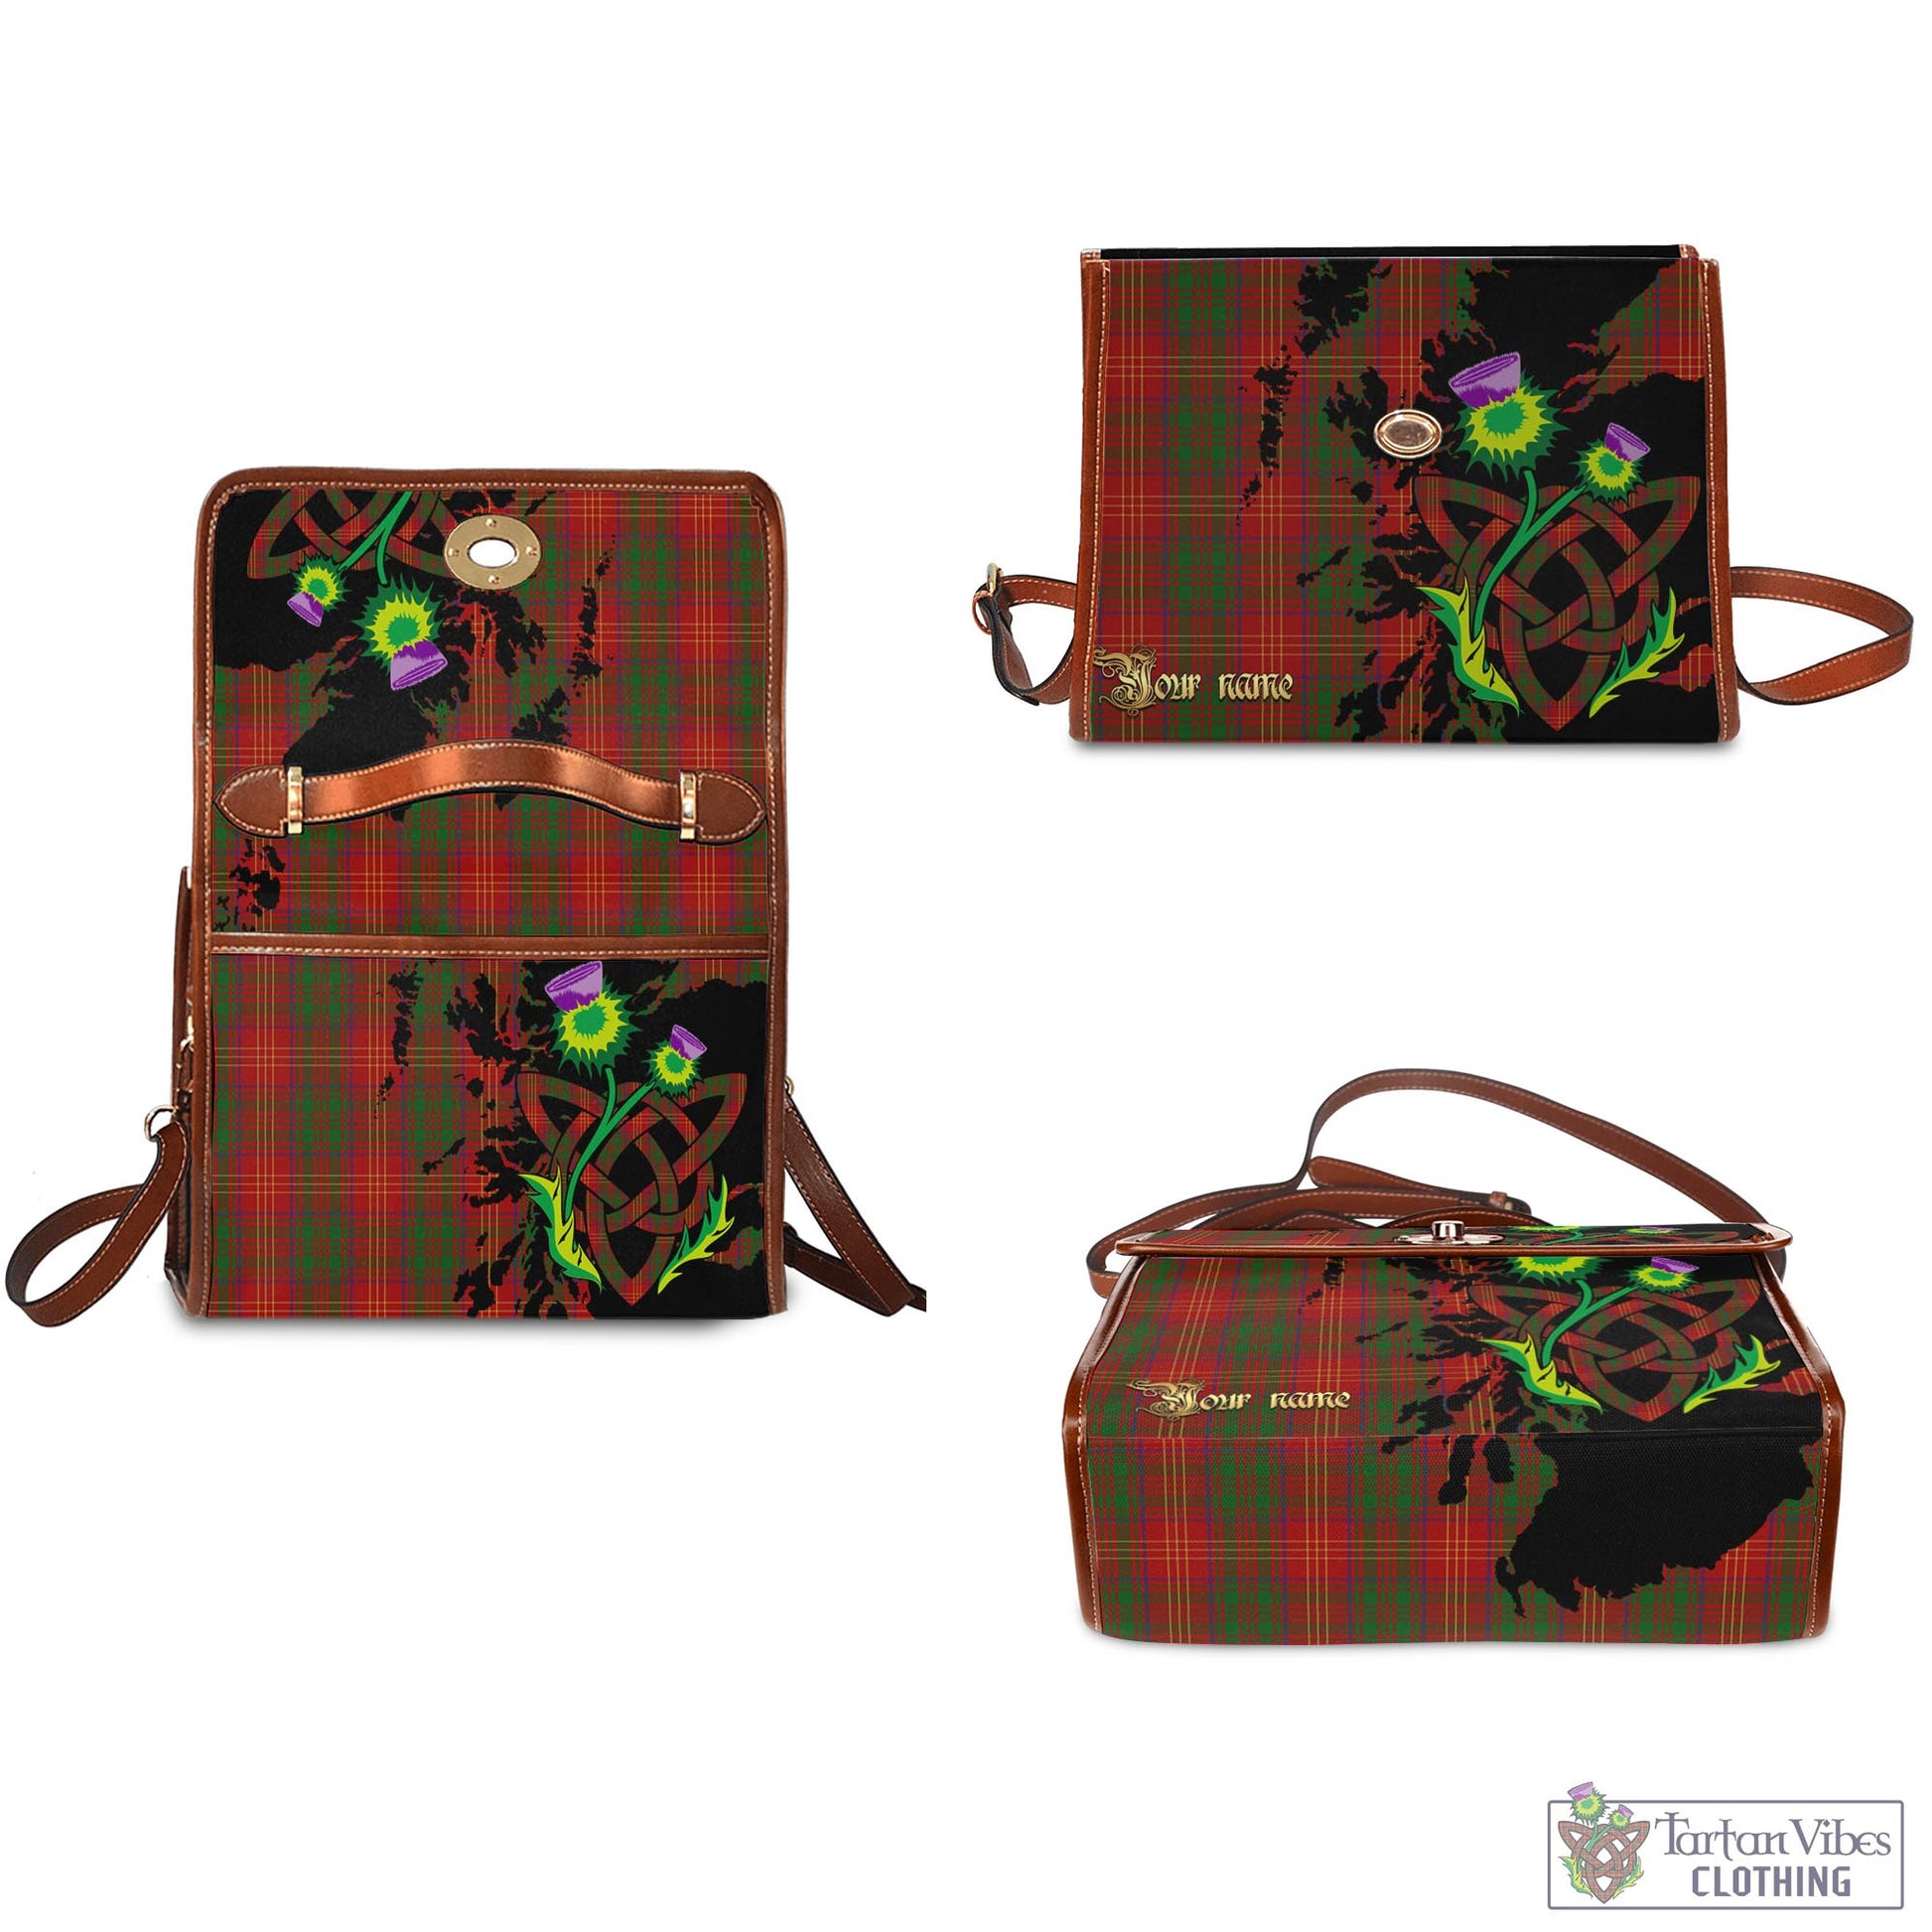 Tartan Vibes Clothing Burns Tartan Waterproof Canvas Bag with Scotland Map and Thistle Celtic Accents